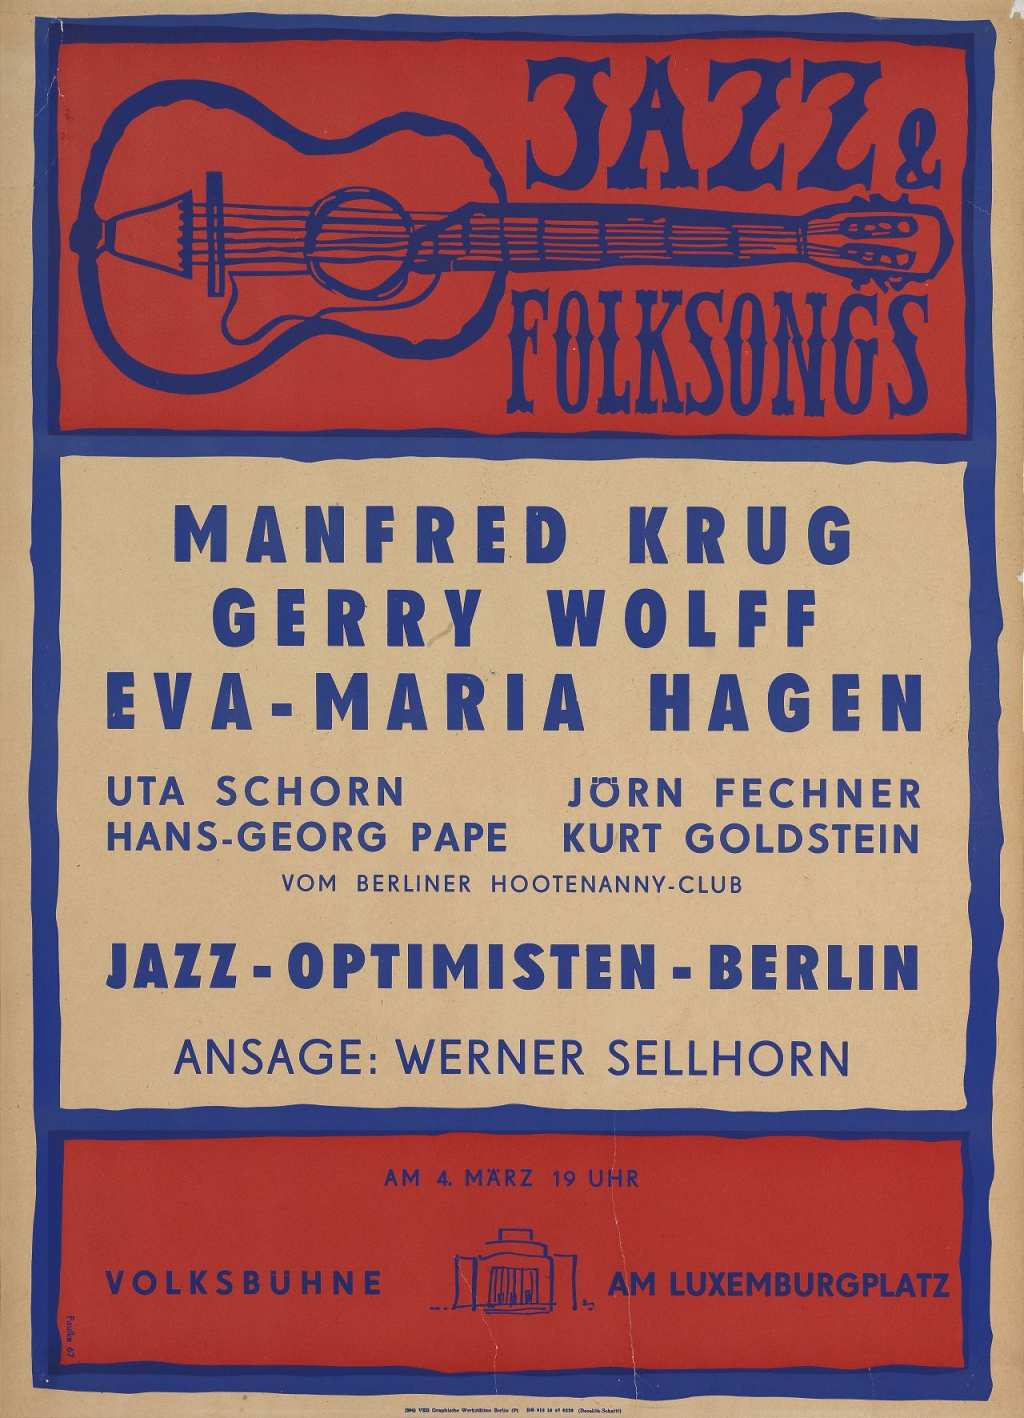 Poster for Jazz & Folksongs, 1967